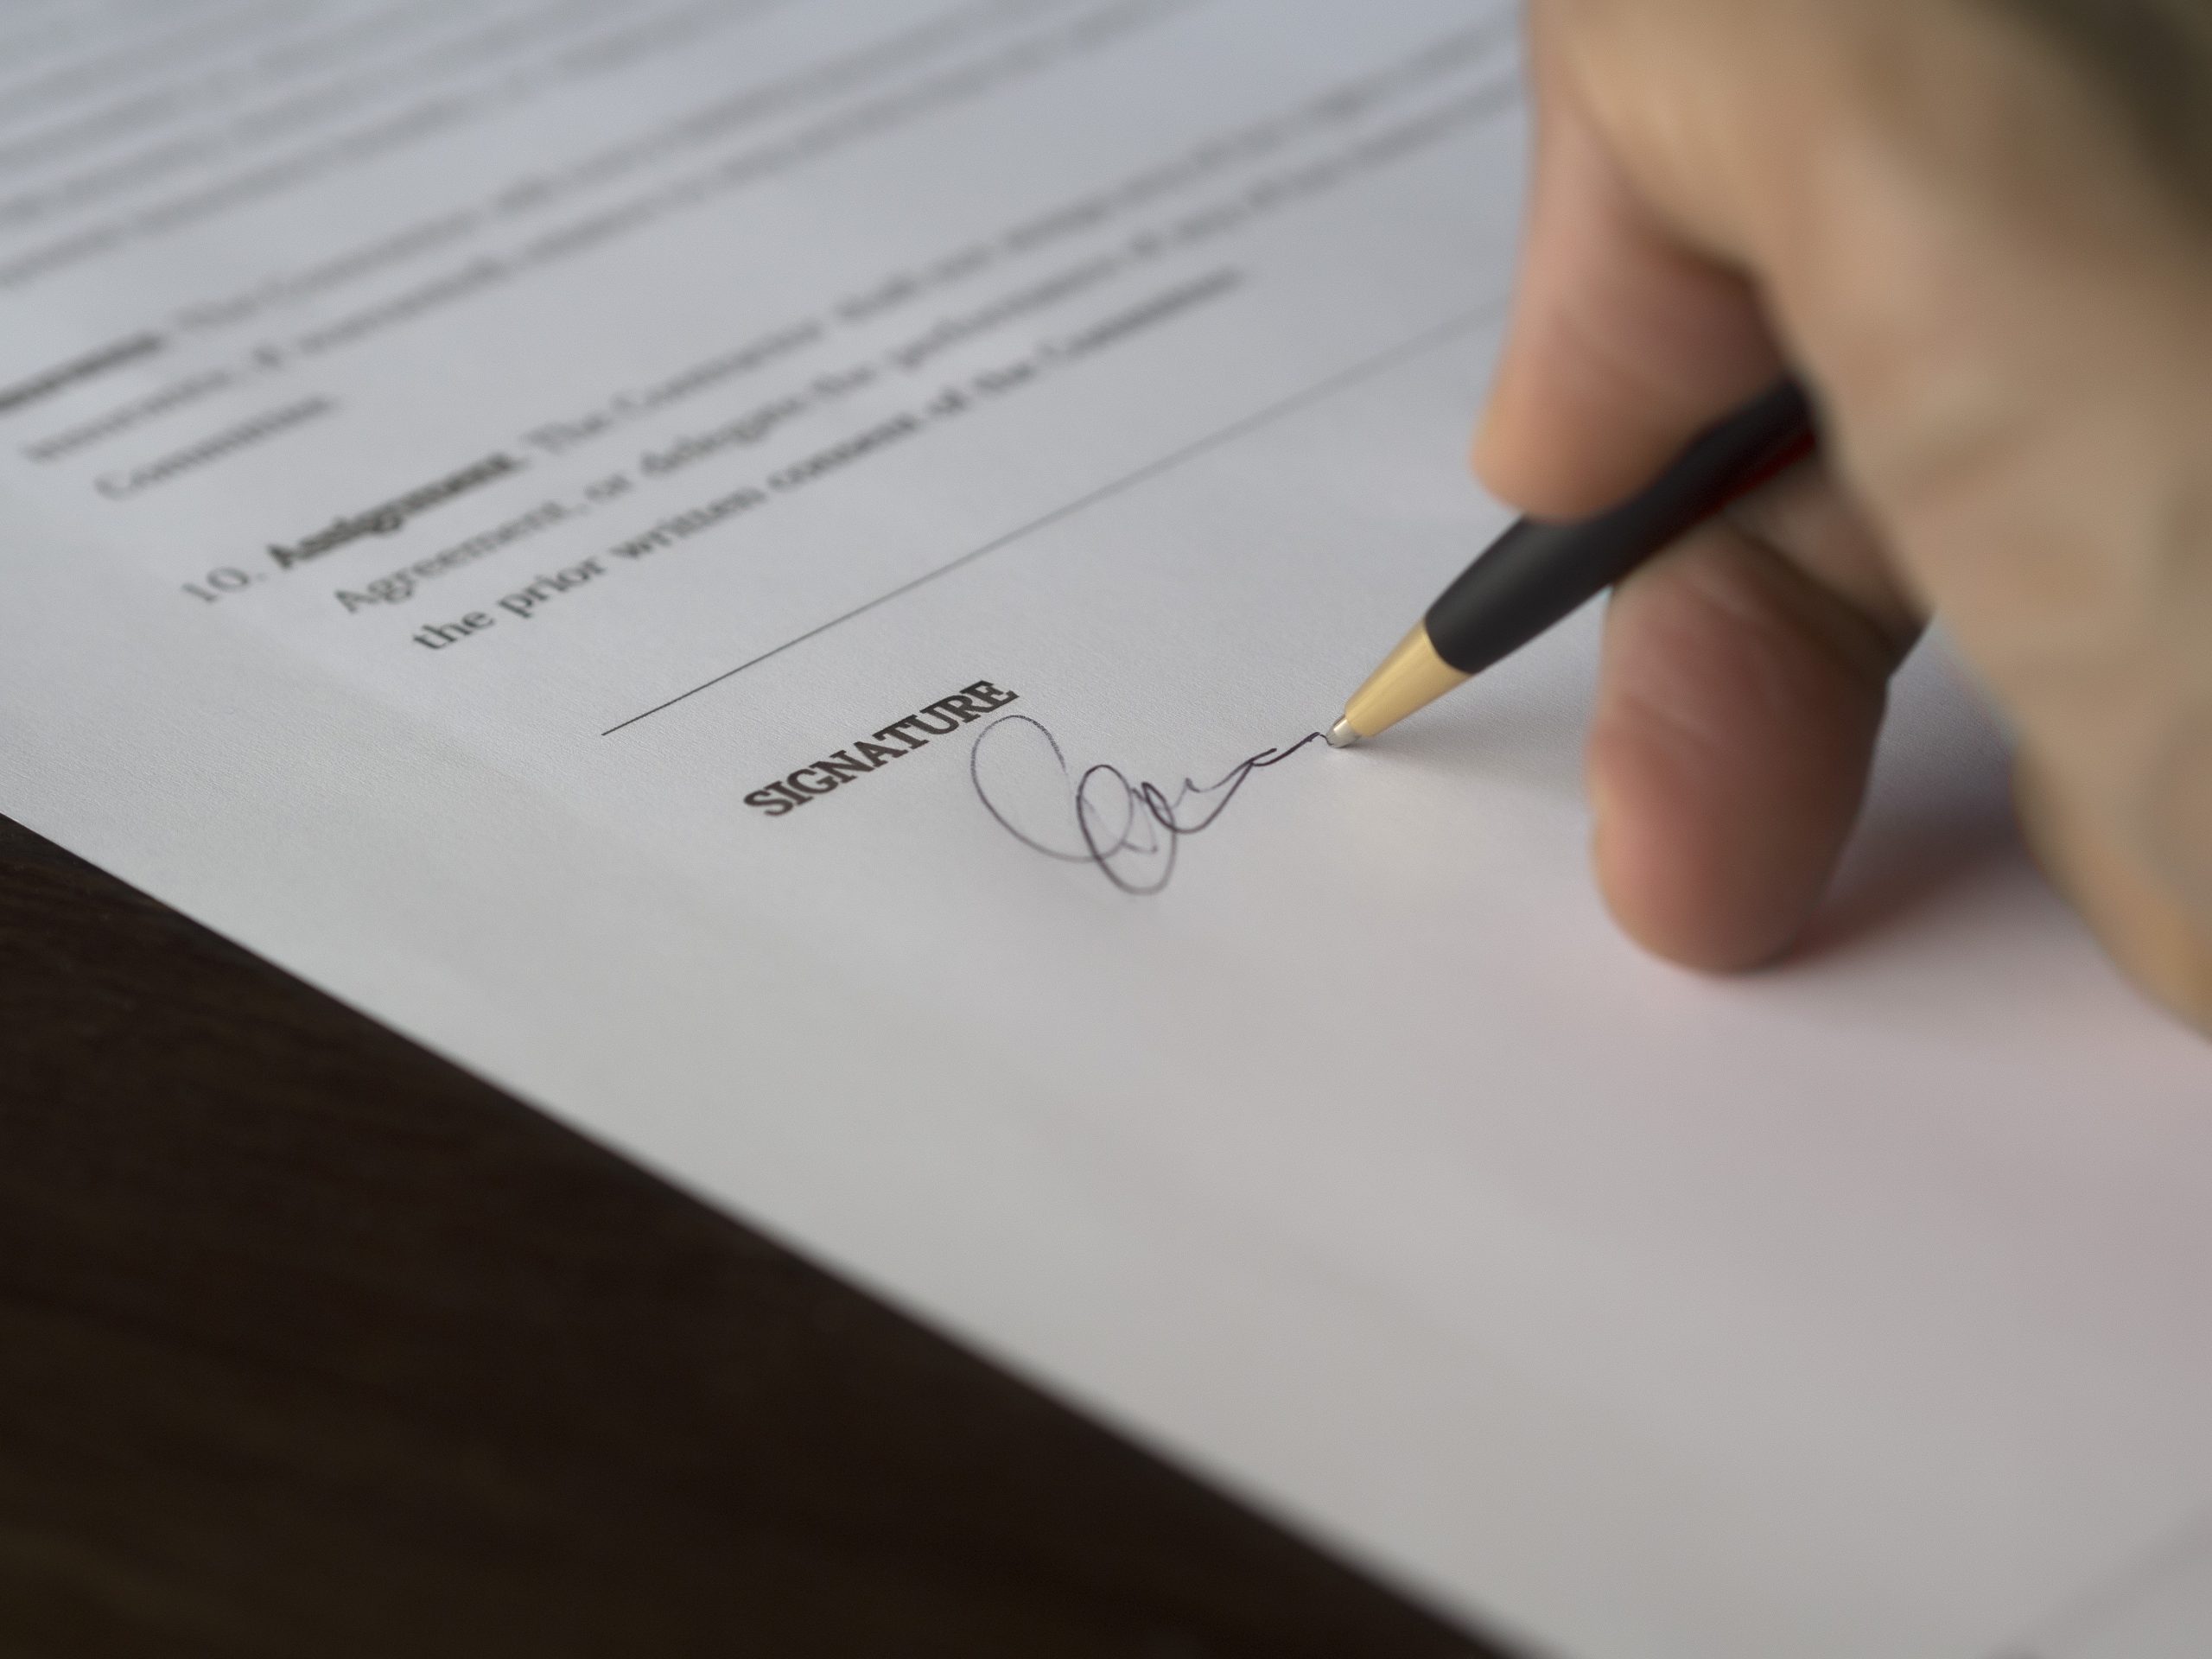 Person signing on paper